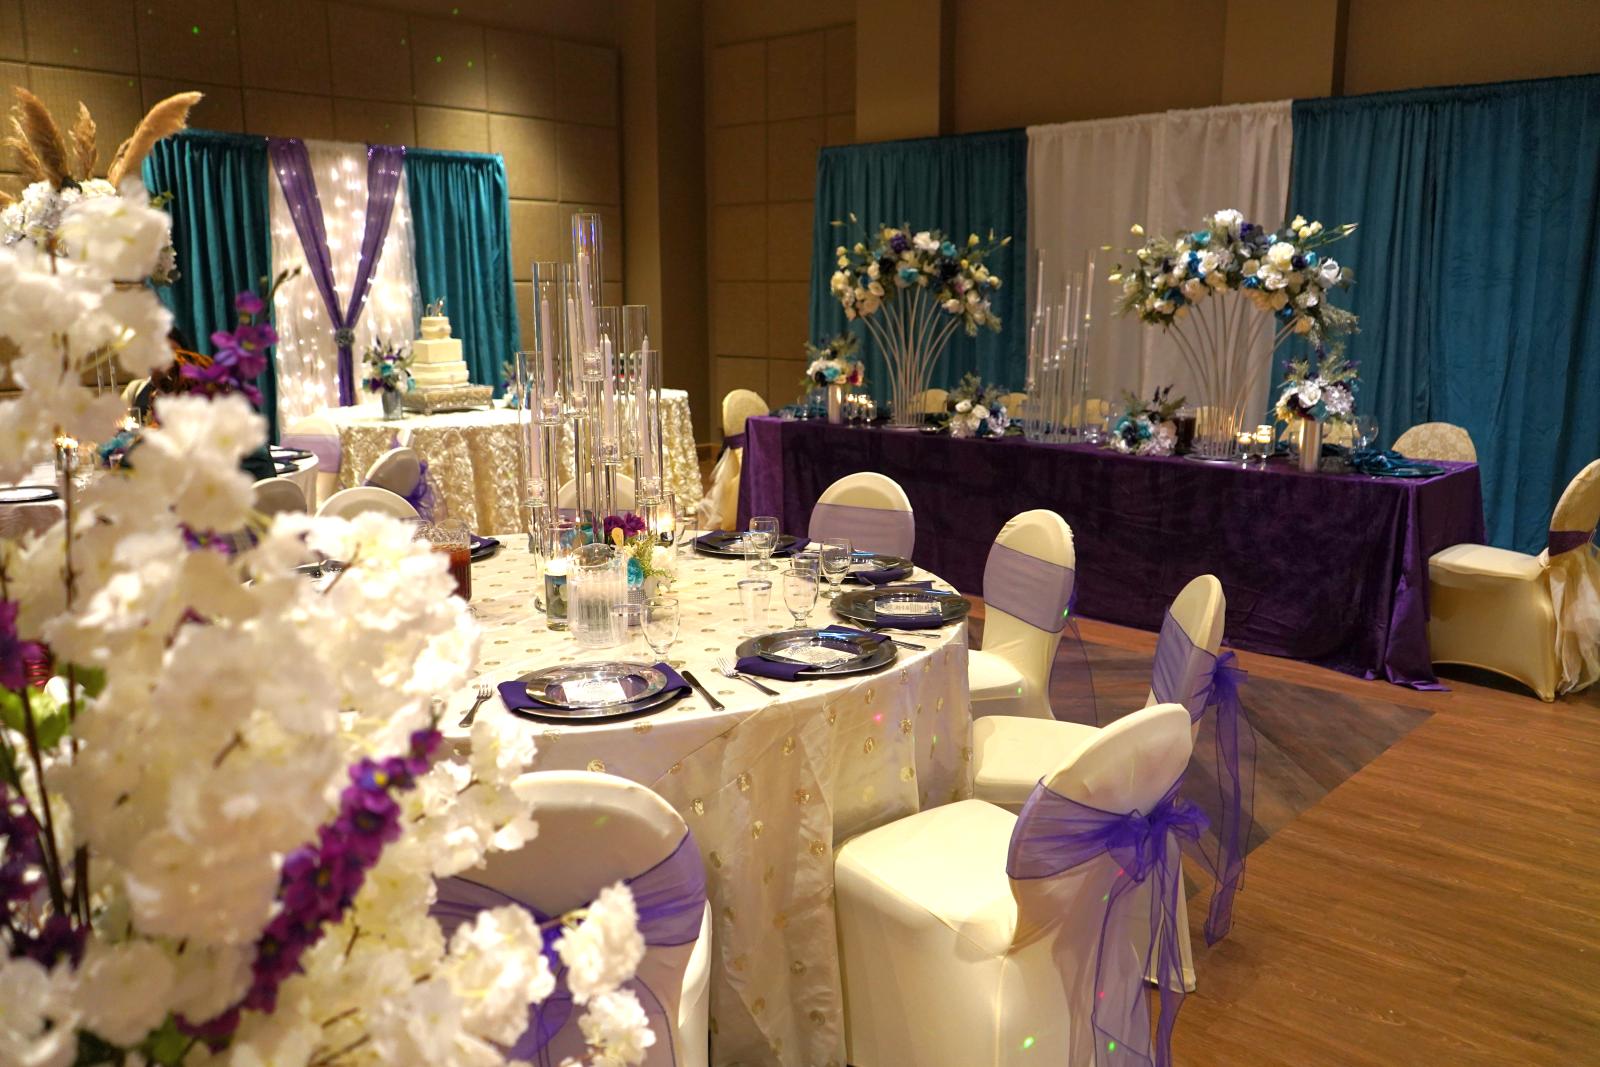 An event space with wedding decorations and a round table with banquet place settings